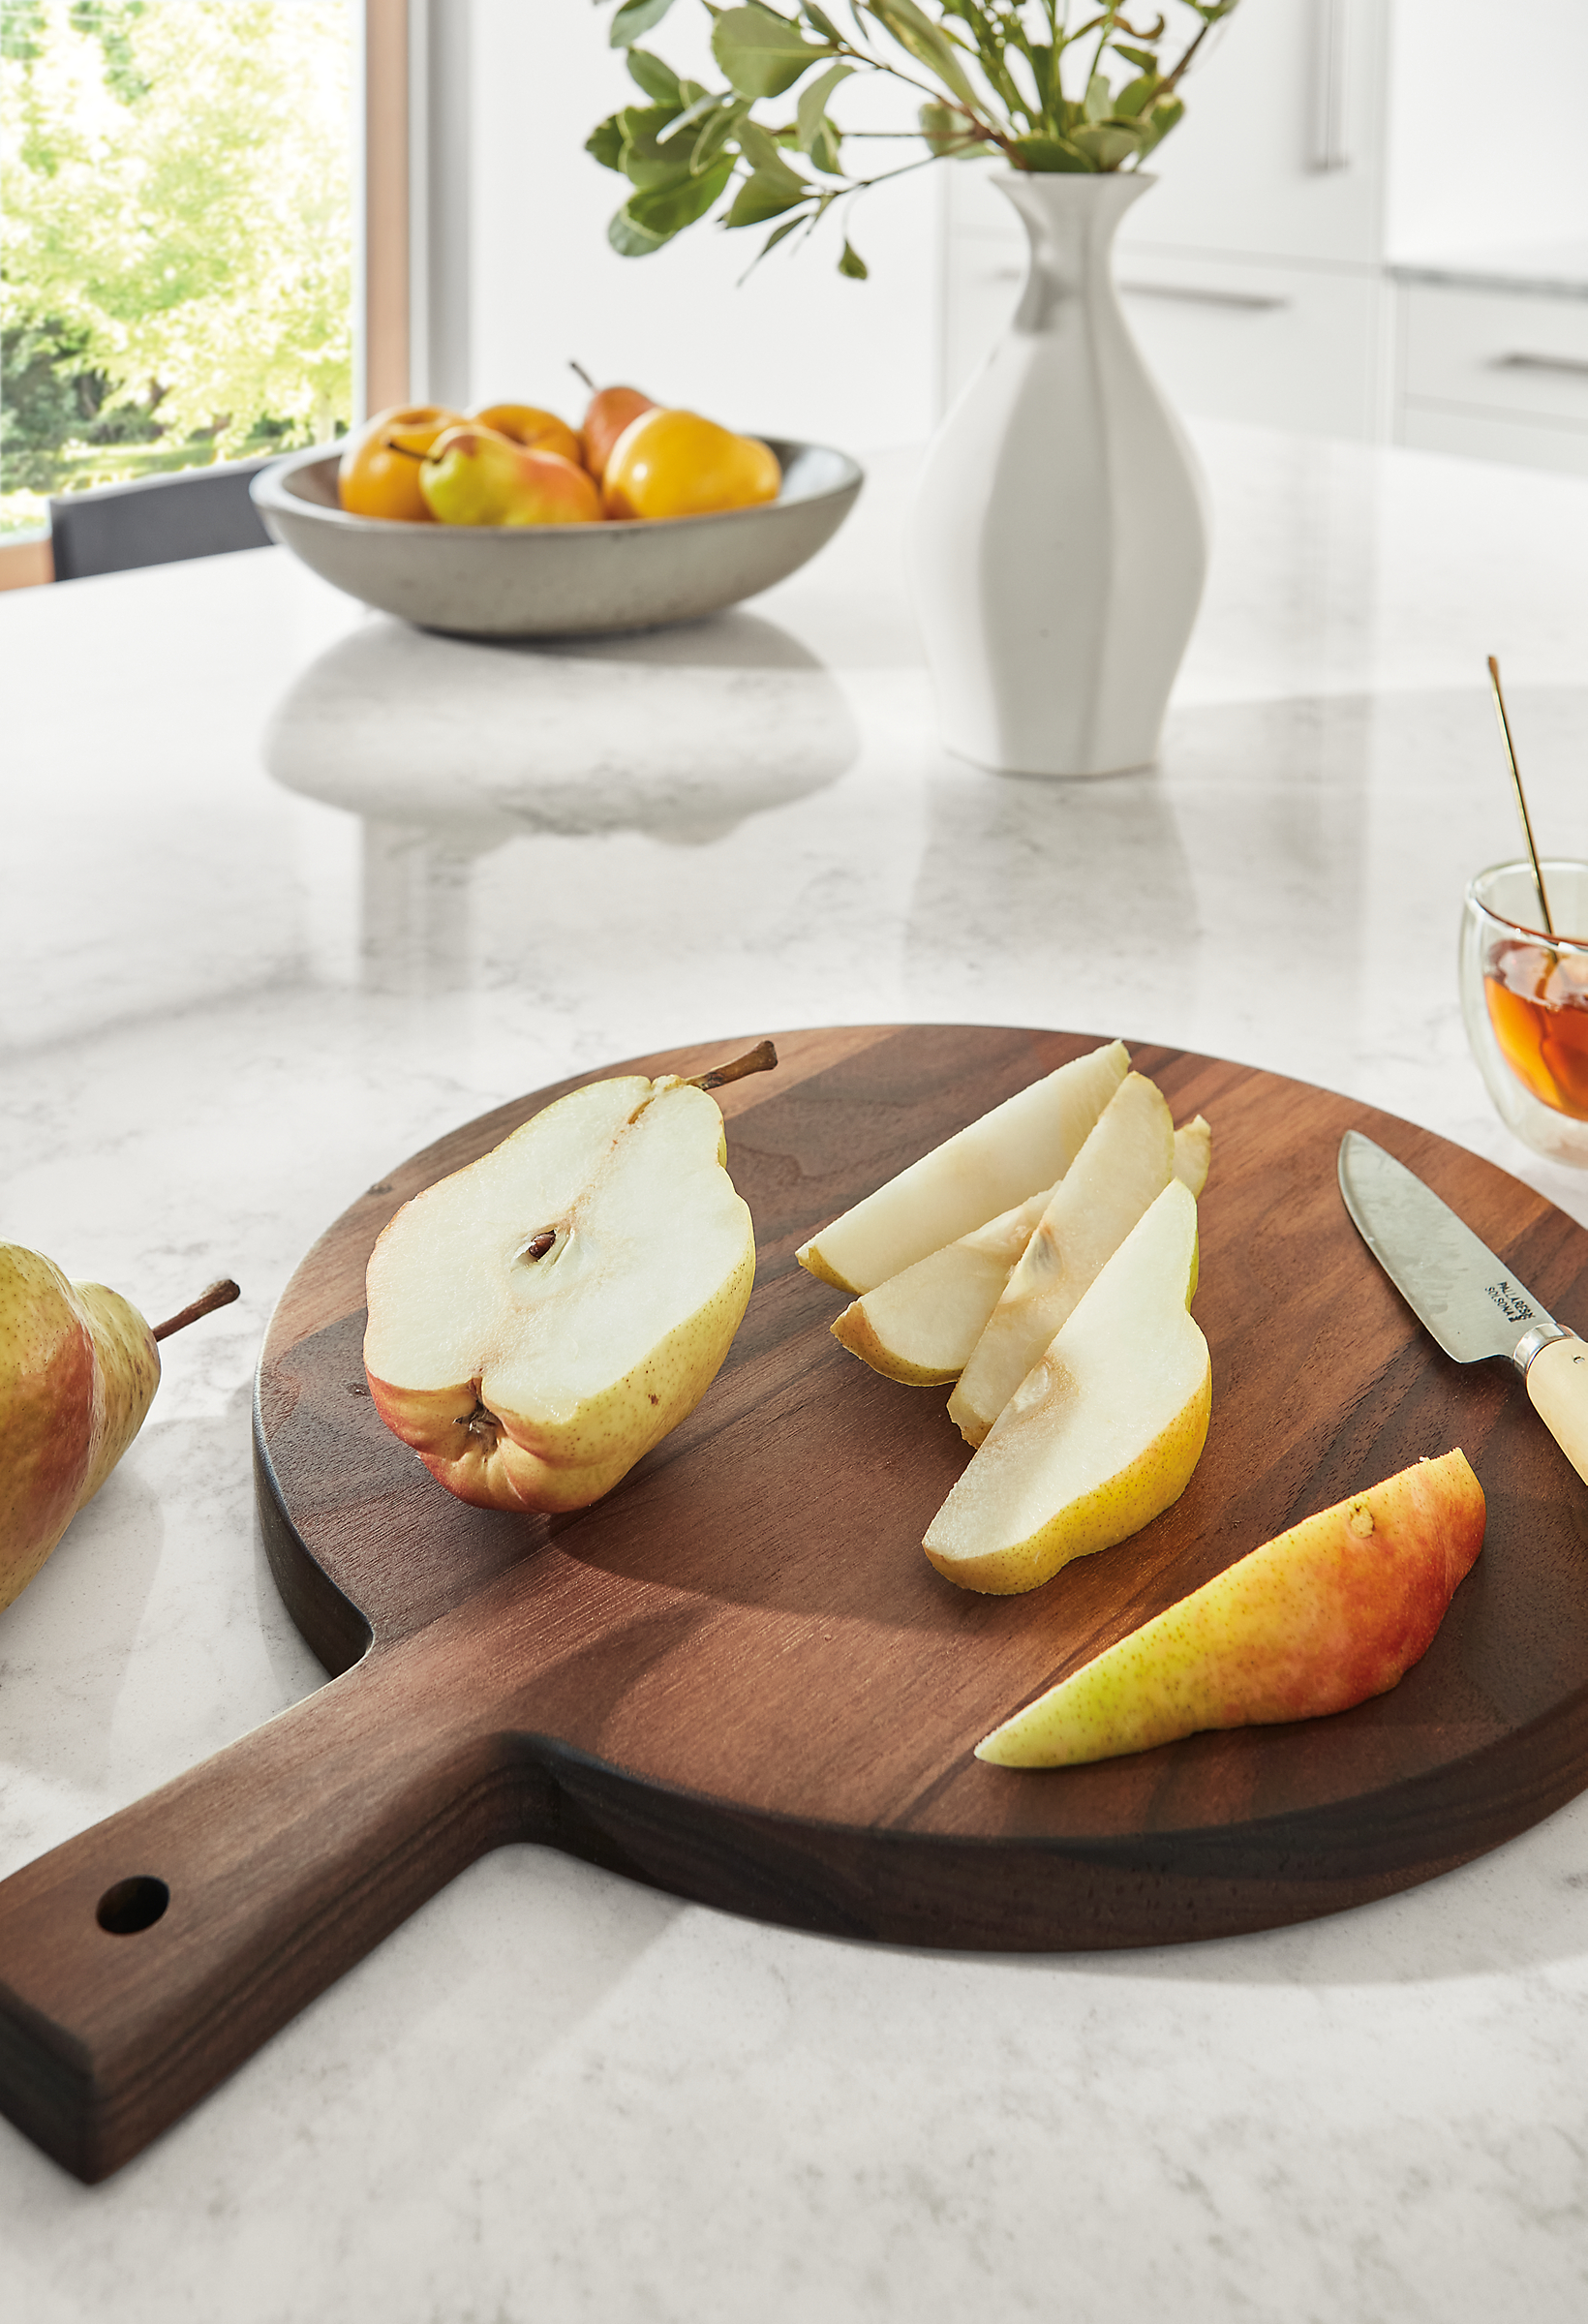 Addy 11-inch diameter serving board in walnut on marbled white quartz counter and Pavo bowl in grey.